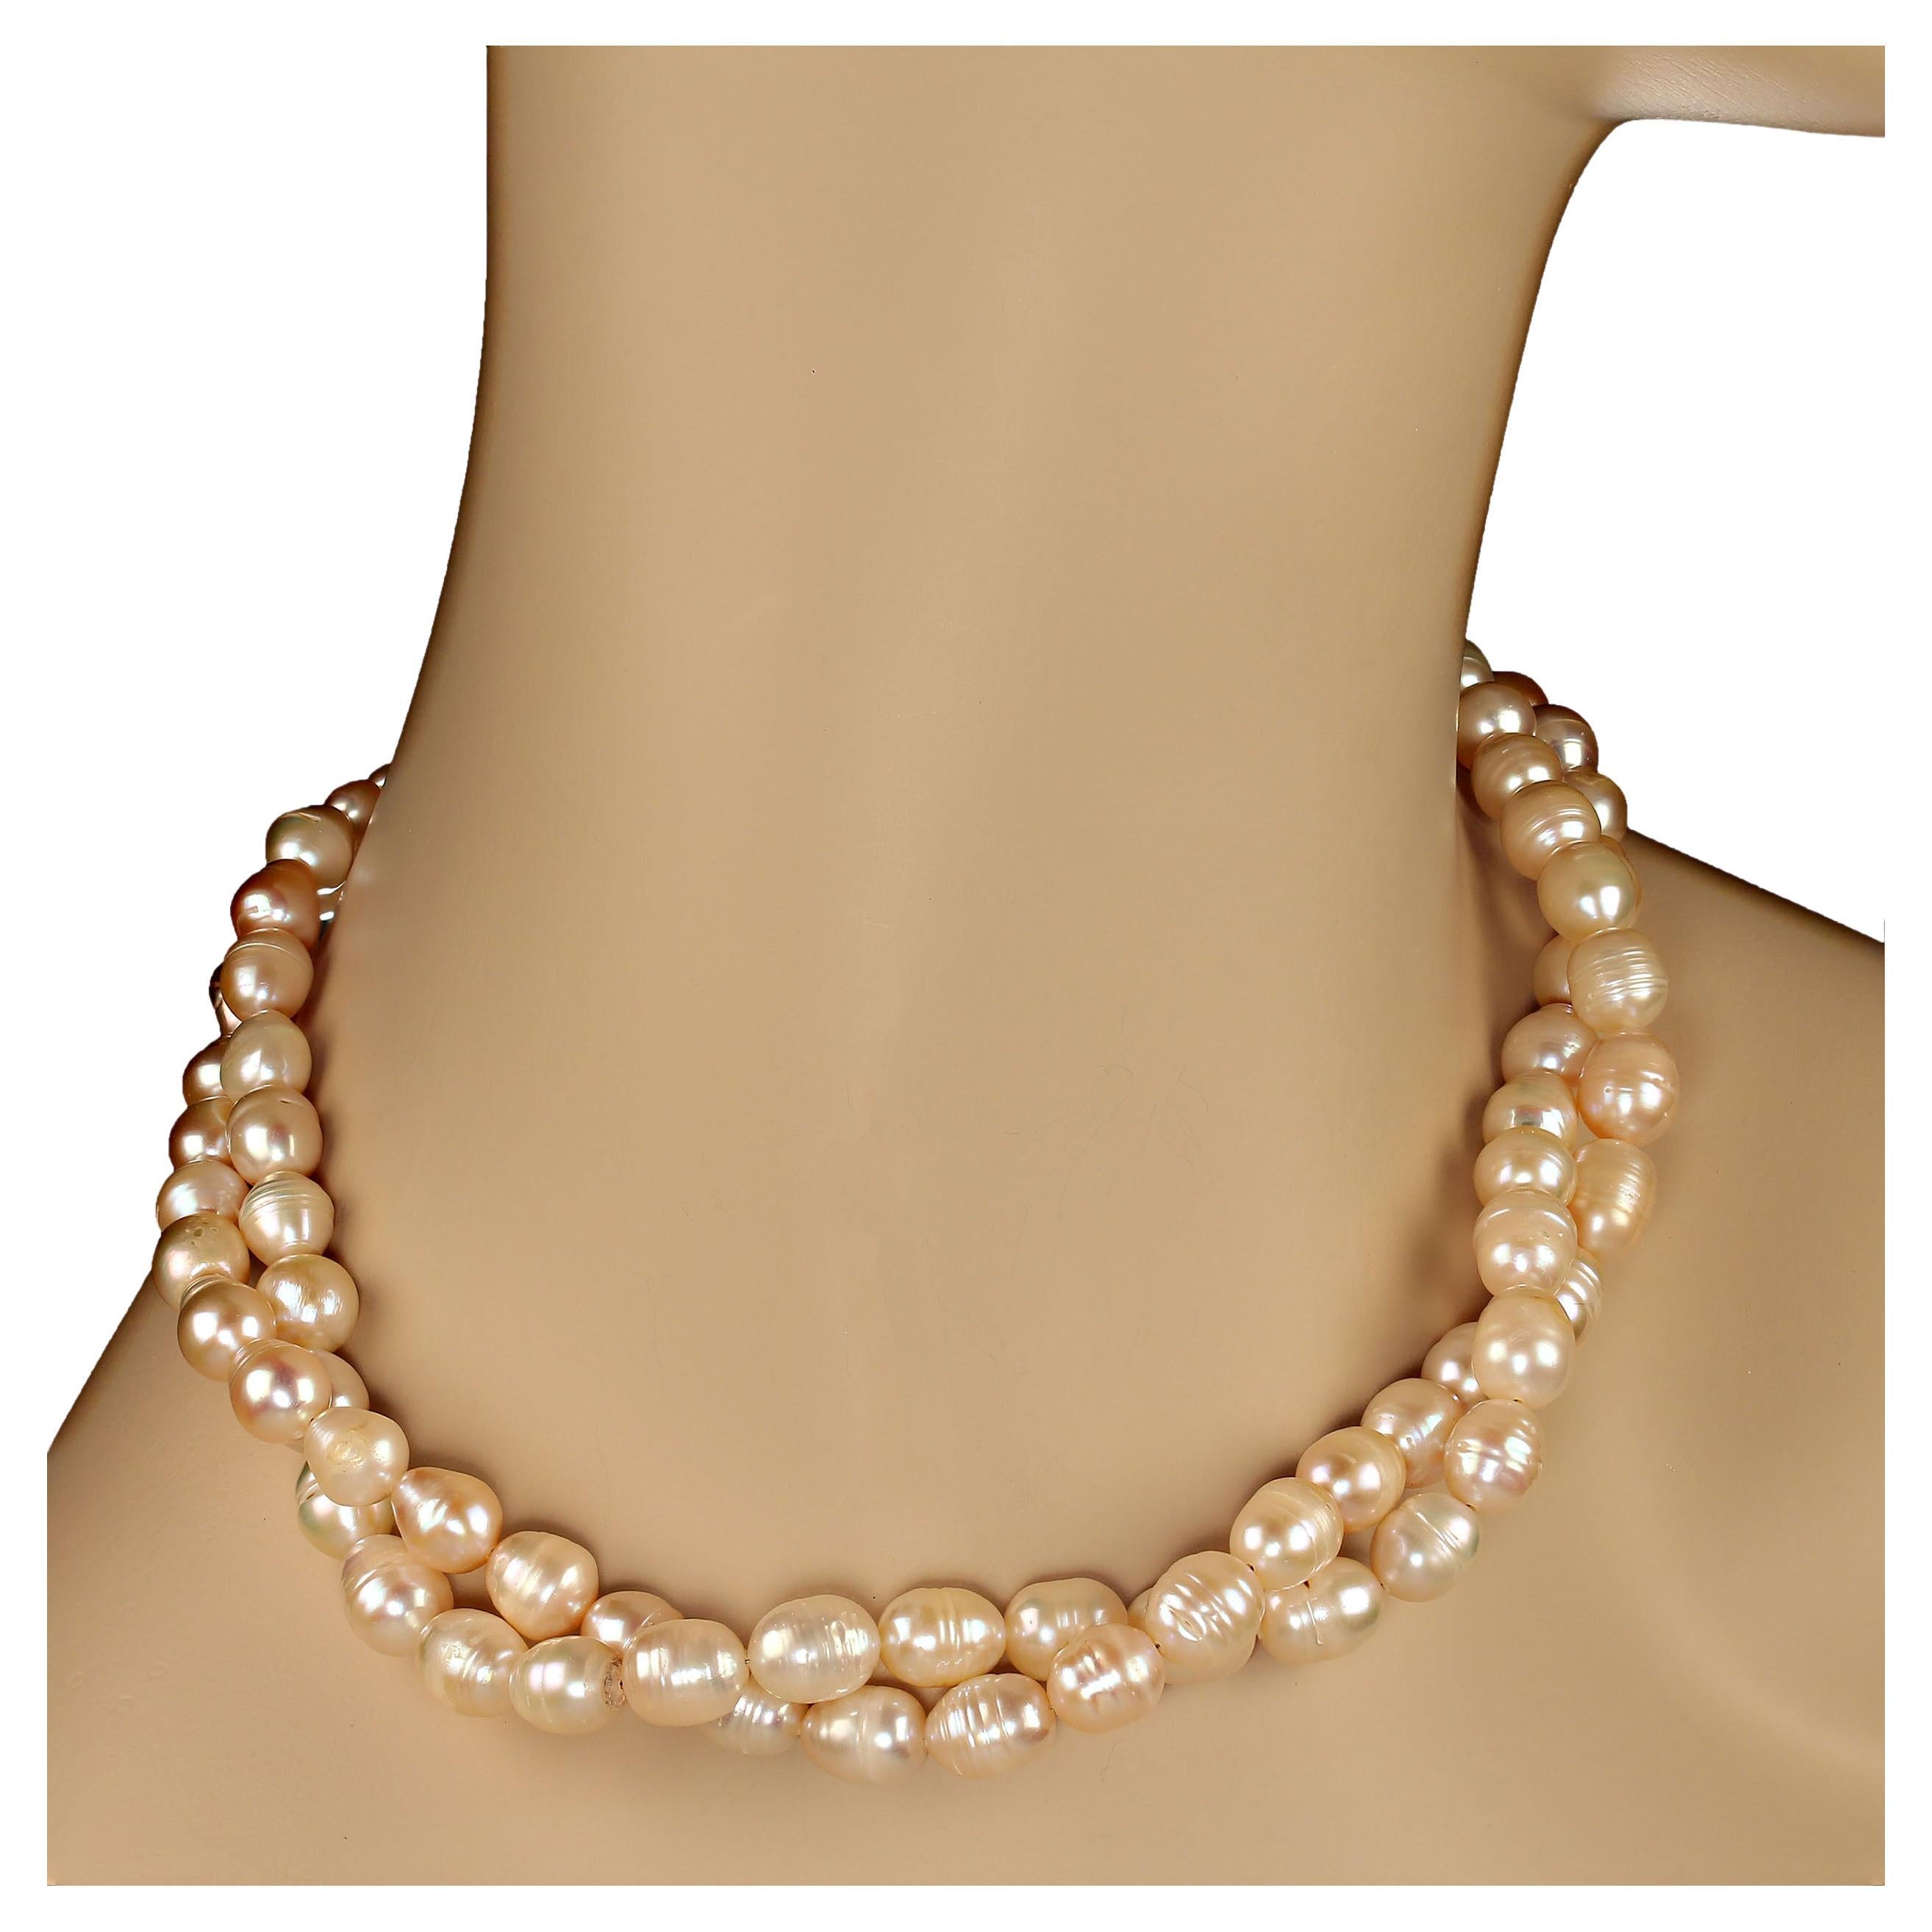 21 Inch traditional 2 strand pearl necklace. These soft pink pearls are complementary to all skin tones. The pearls range from approximately 6mm to 11mm and are oval (potato) shaped.  The necklace can be worn with two strands side by side or gently